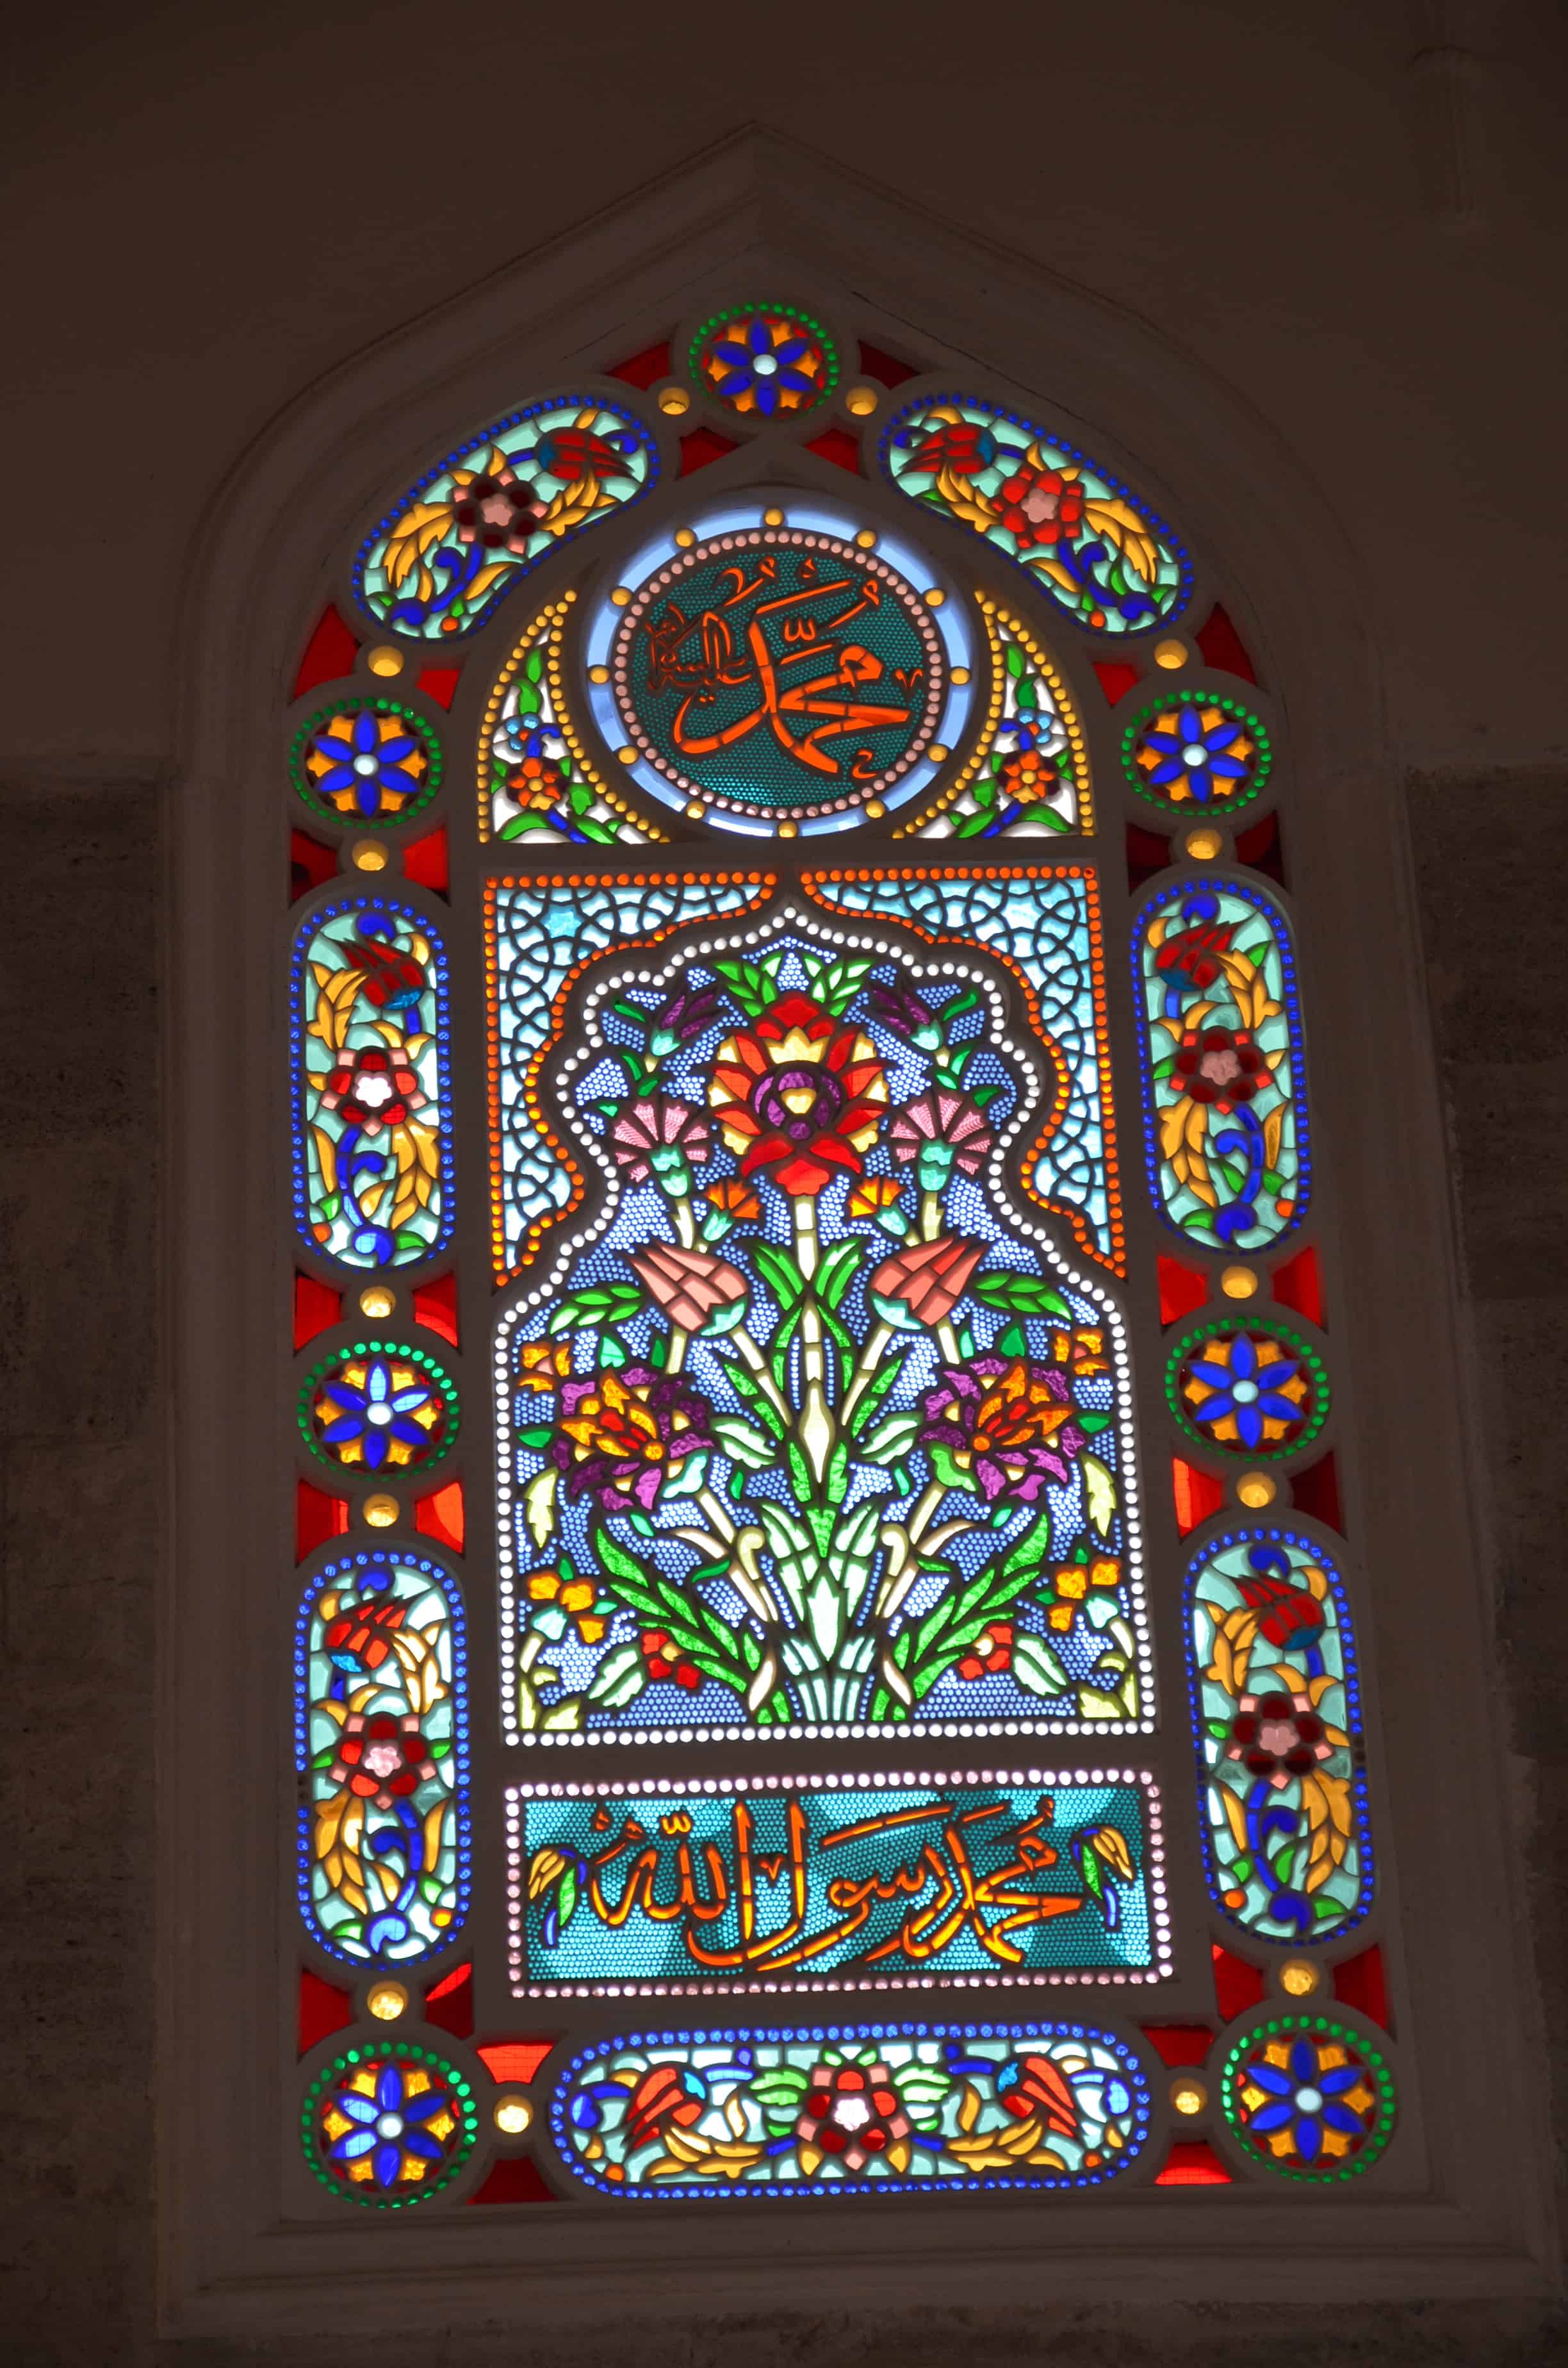 Stained glass window in the Şemsi Pasha Mosque in Üsküdar, Istanbul, Turkey